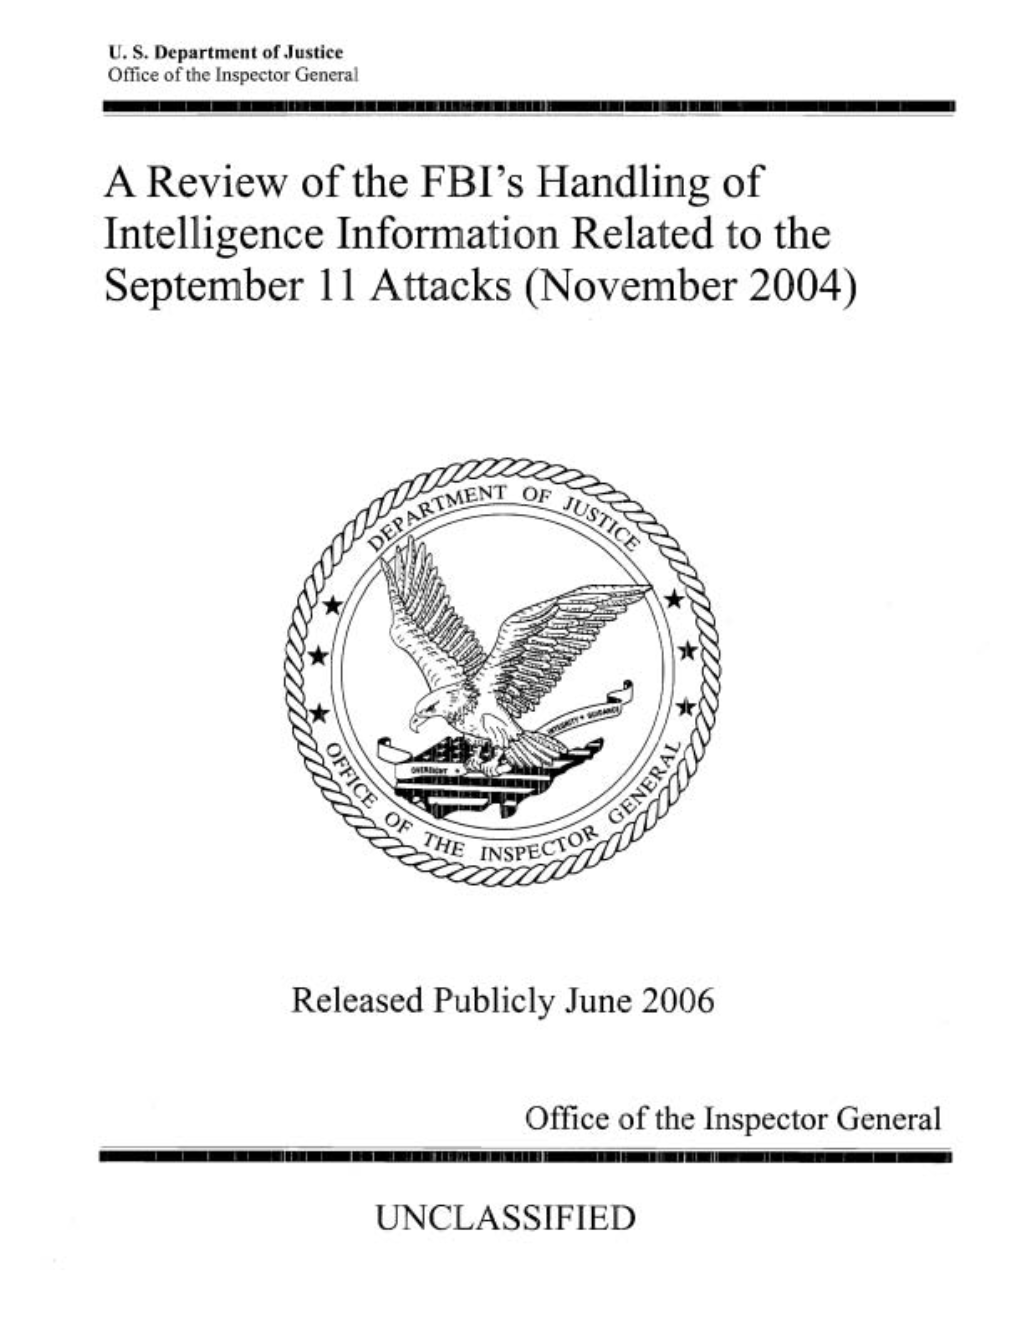 A Review of the FBI's Handling of Intelligence Information Related To